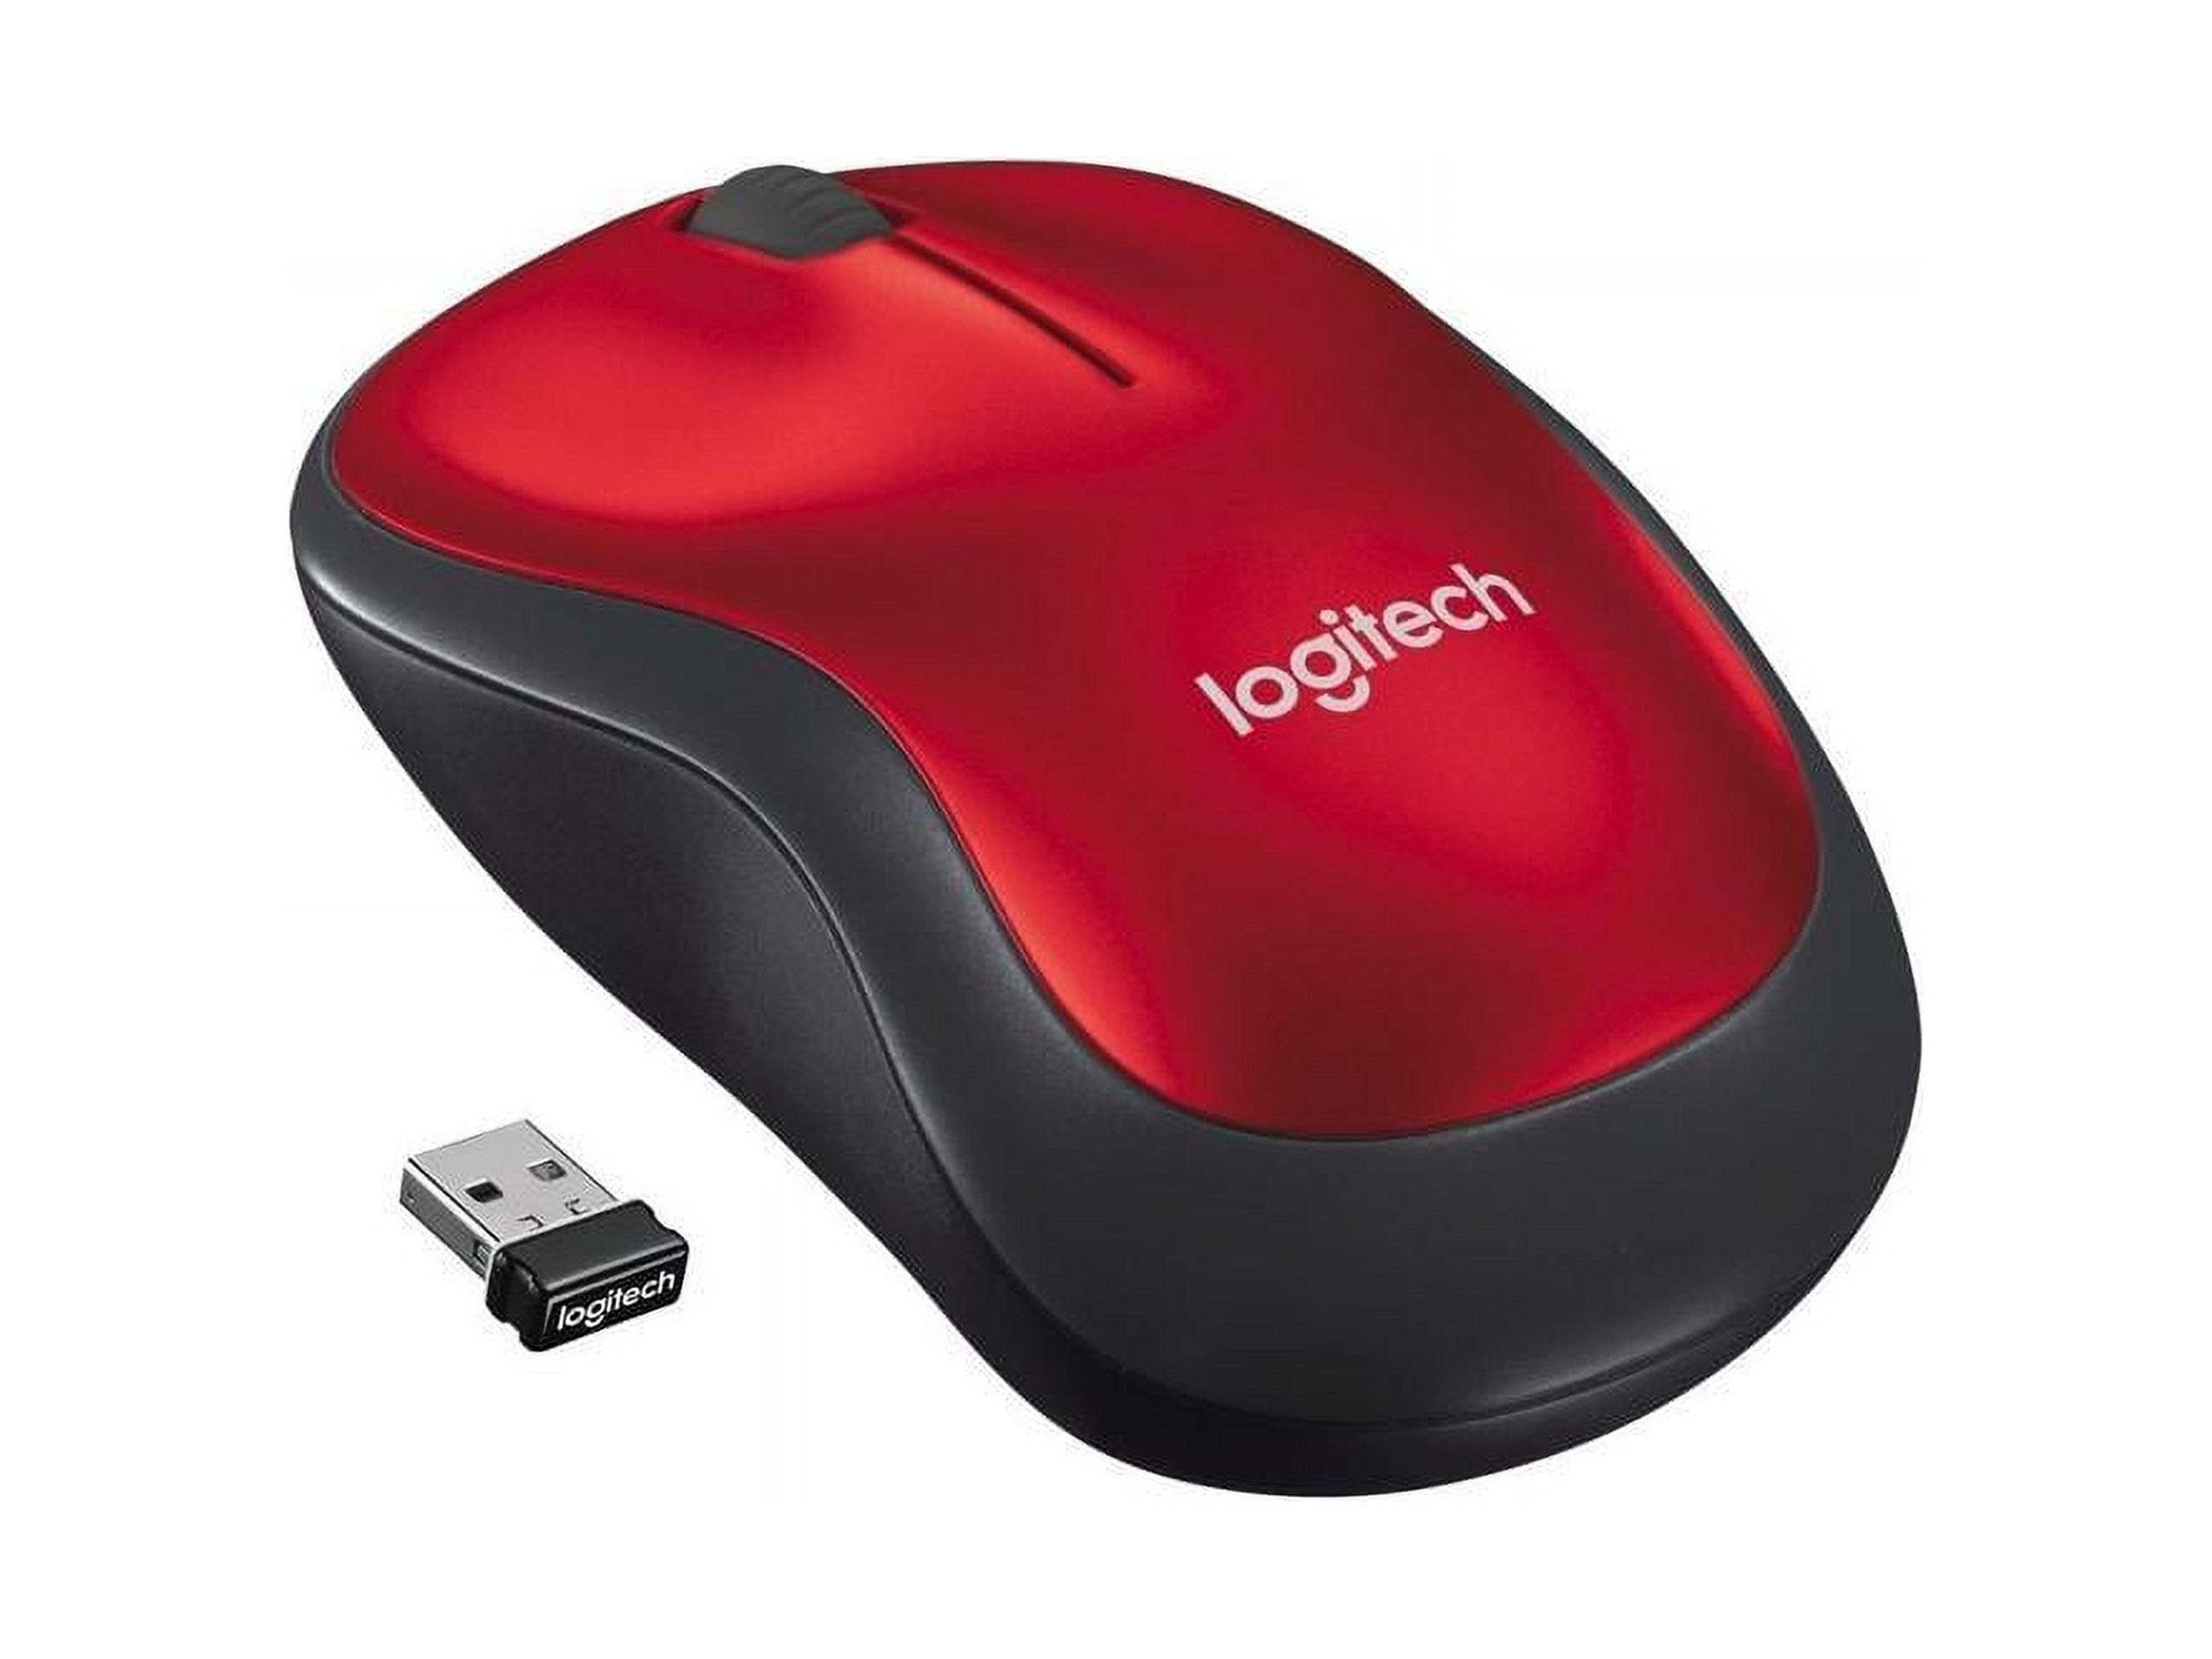 Logitech M185 Wireless Mouse, 2.4GHz with USB Mini Receiver, Ambidextrous, Red - image 1 of 15